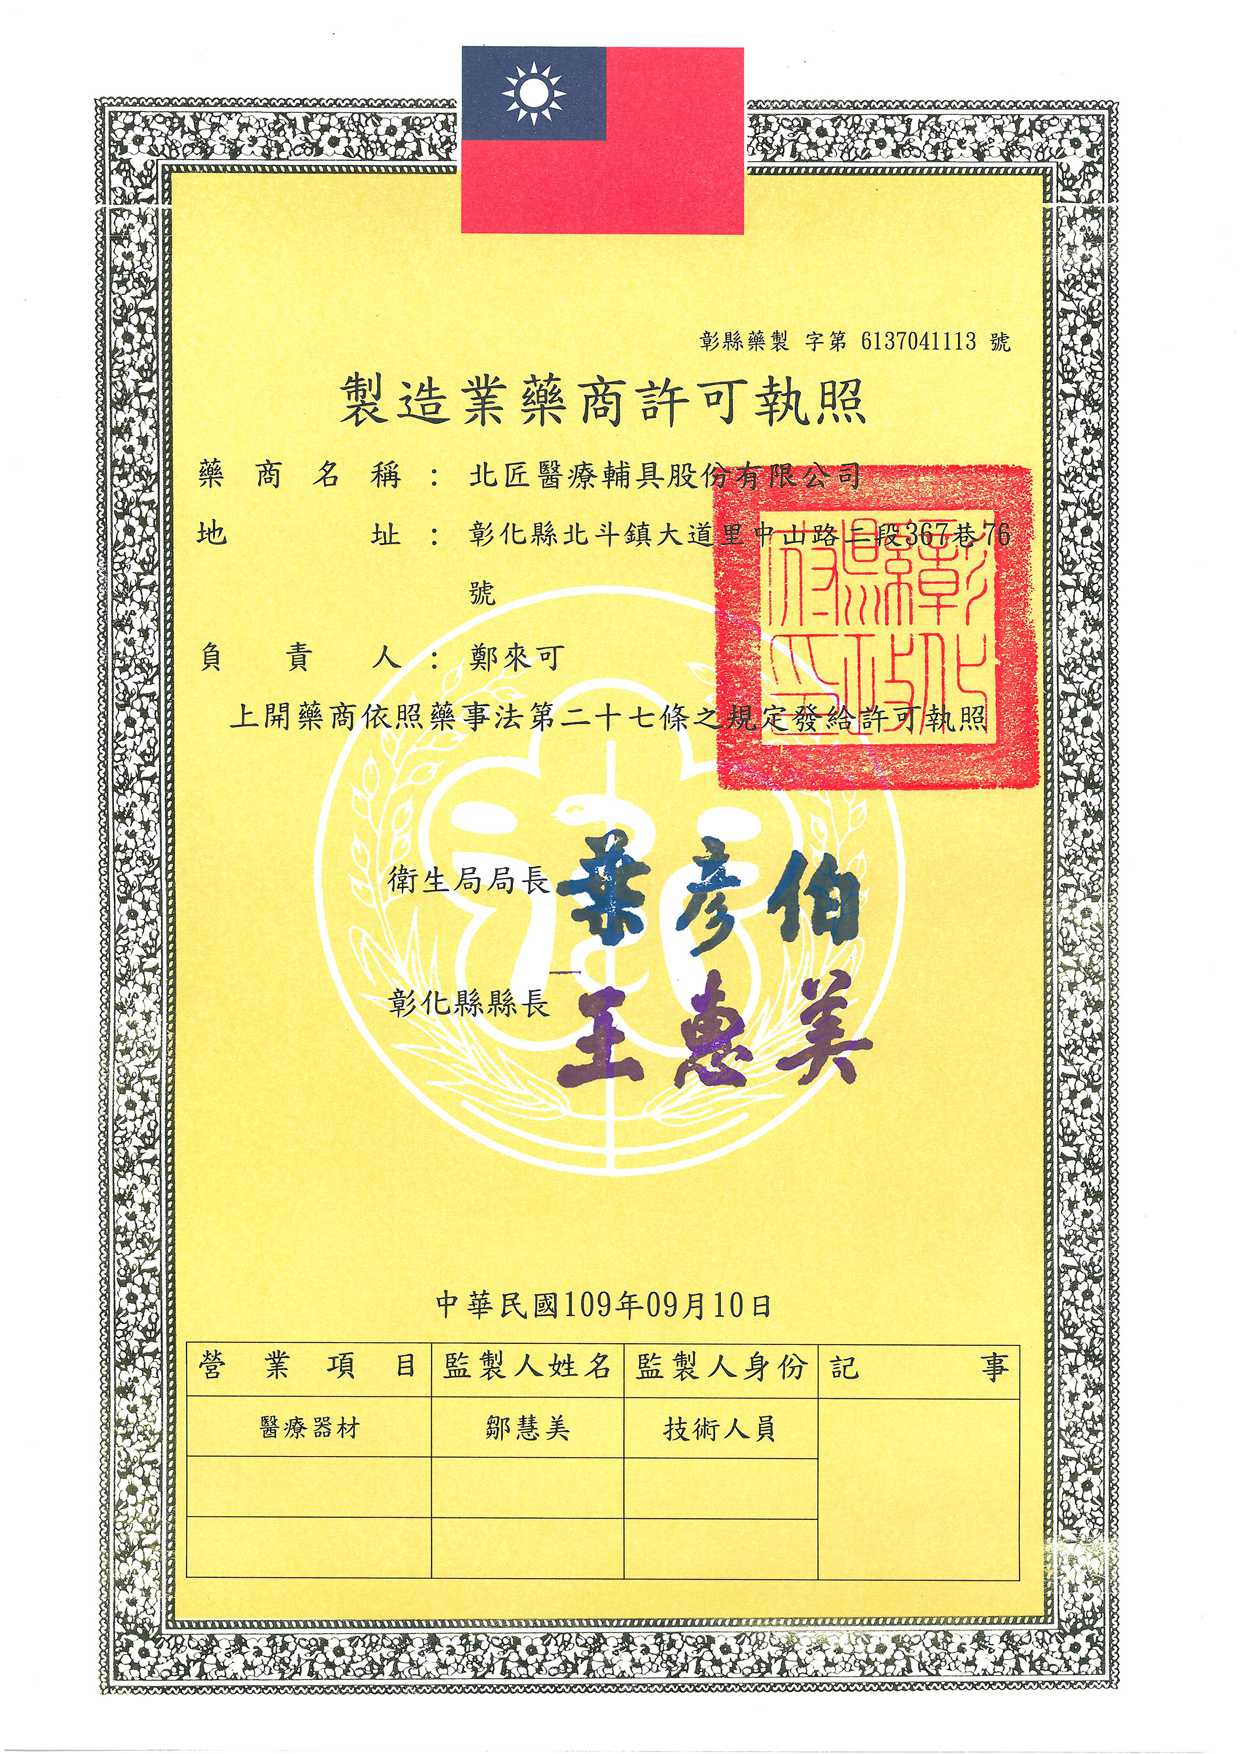 Pharmacist manufacturing license